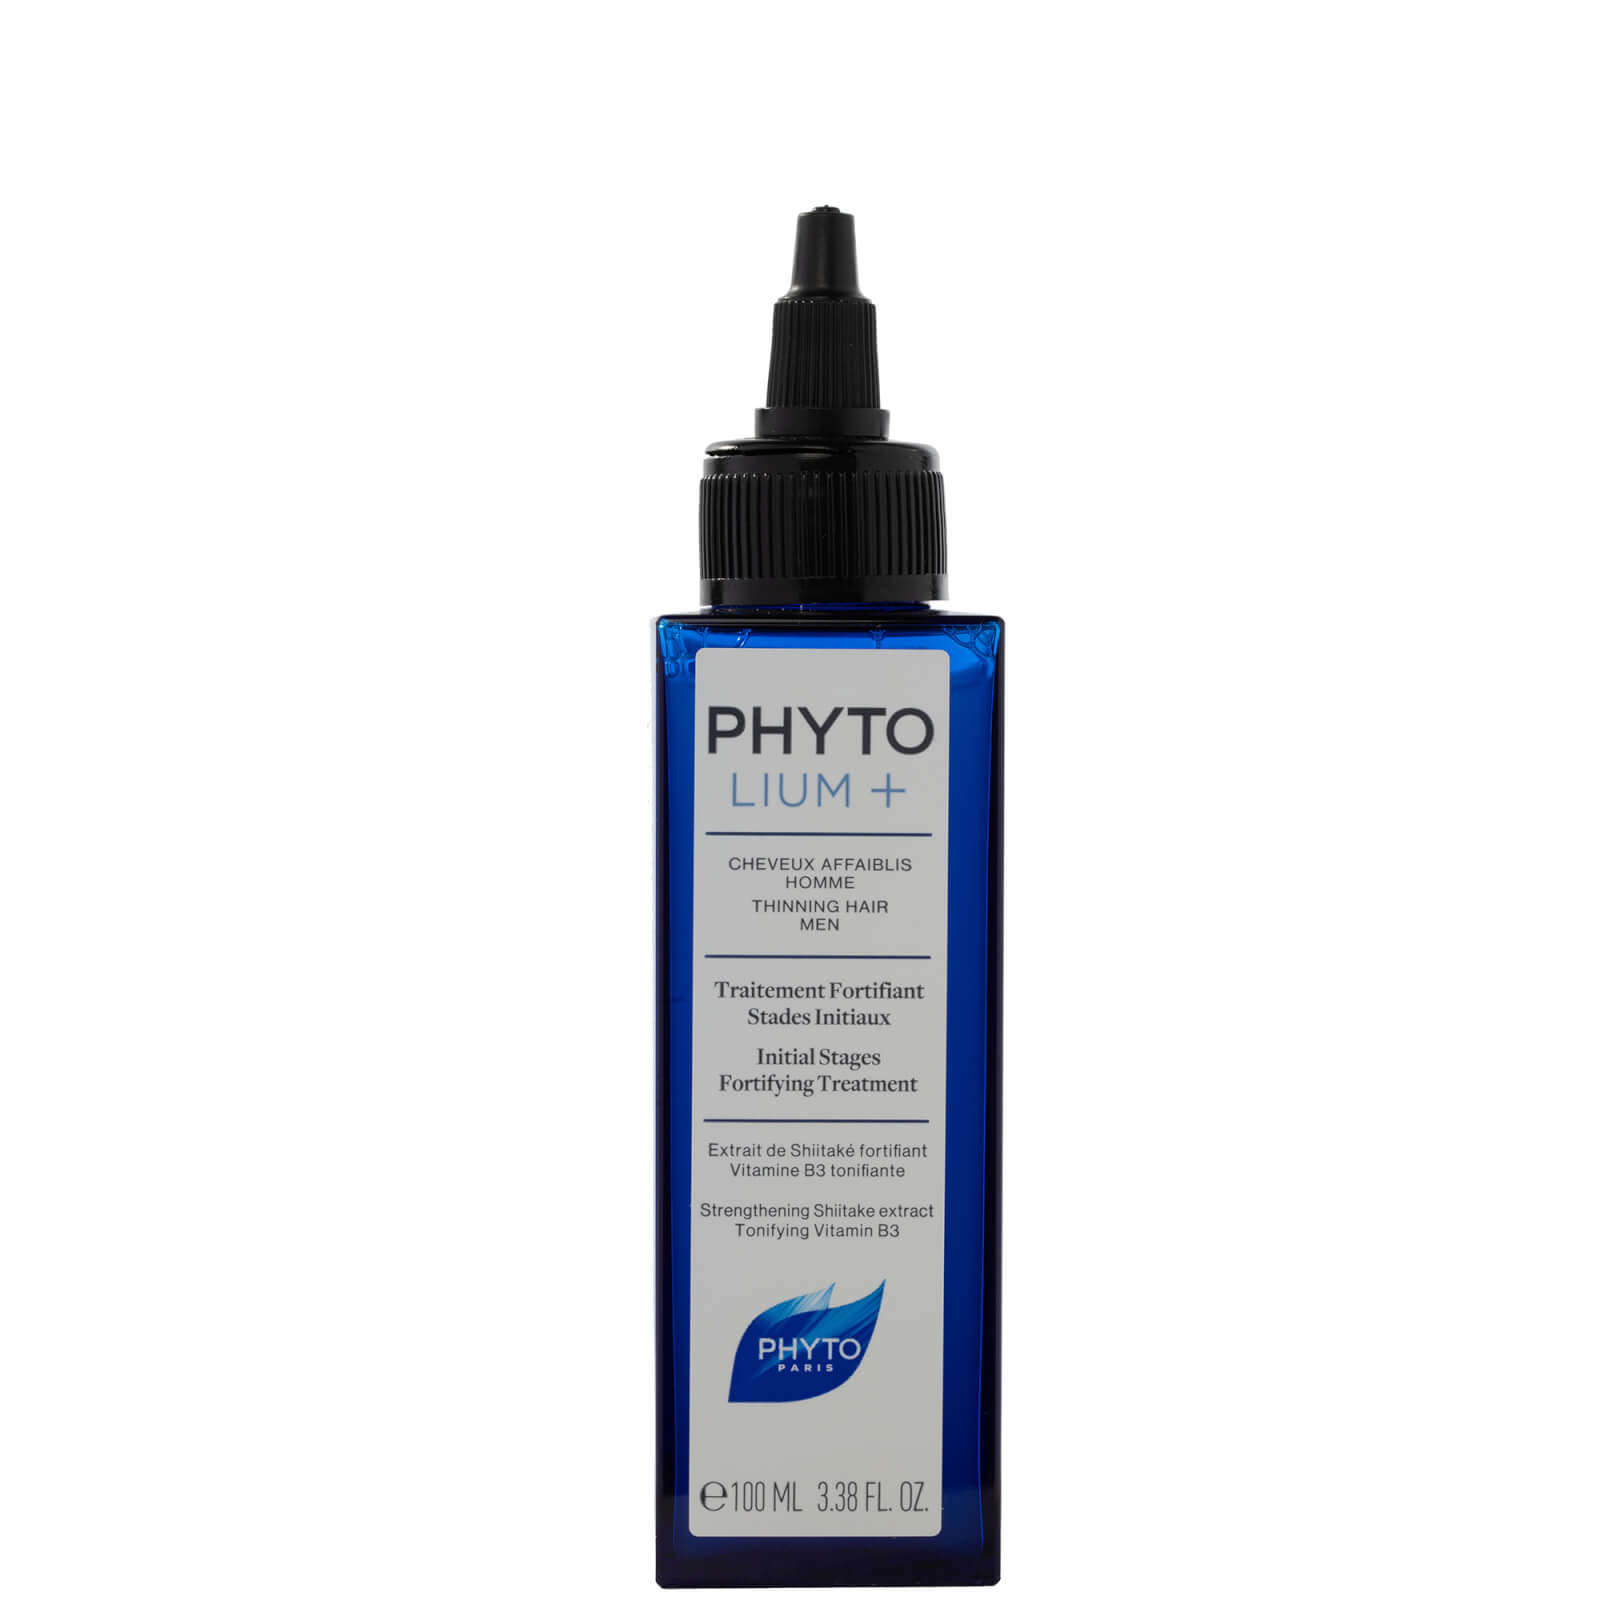 Phyto Lium And Initial Stages Strengthenning Treatment 3.38 oz